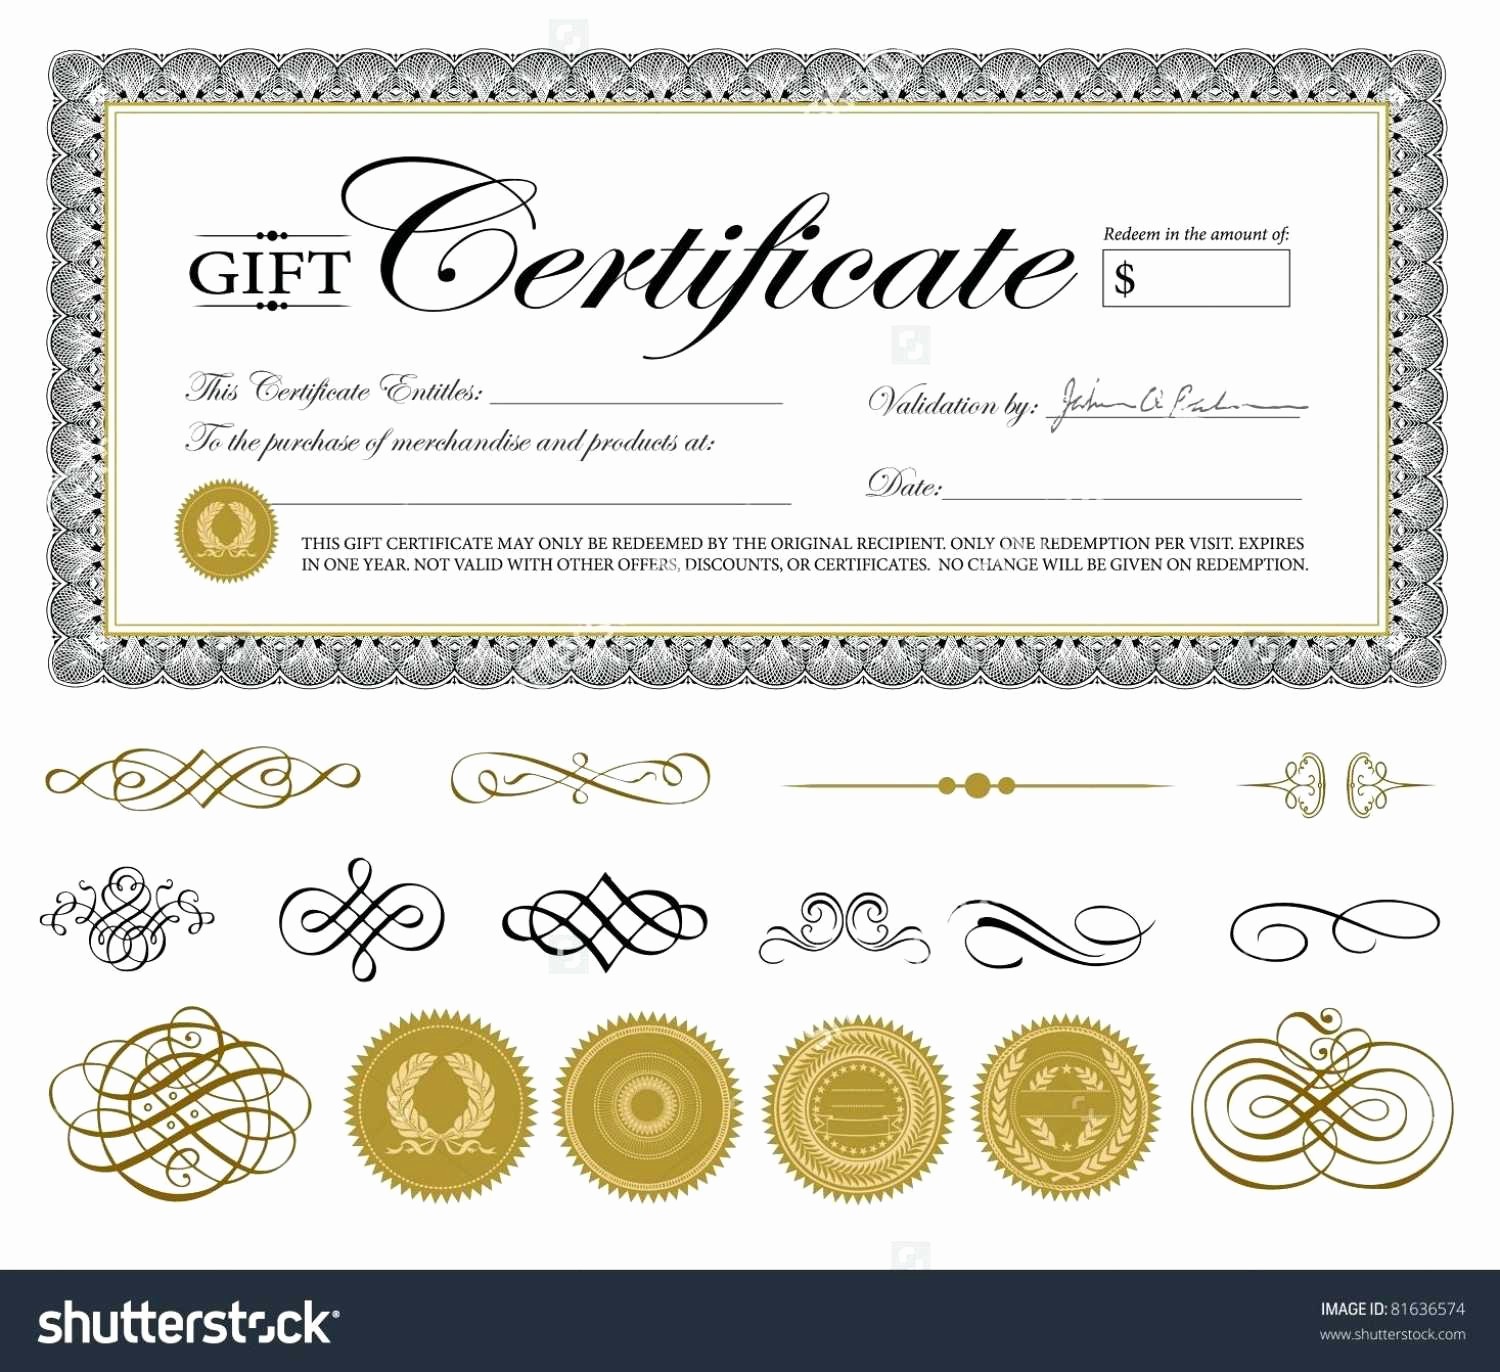 Free Share Certificate Template Bc Brochure Templates